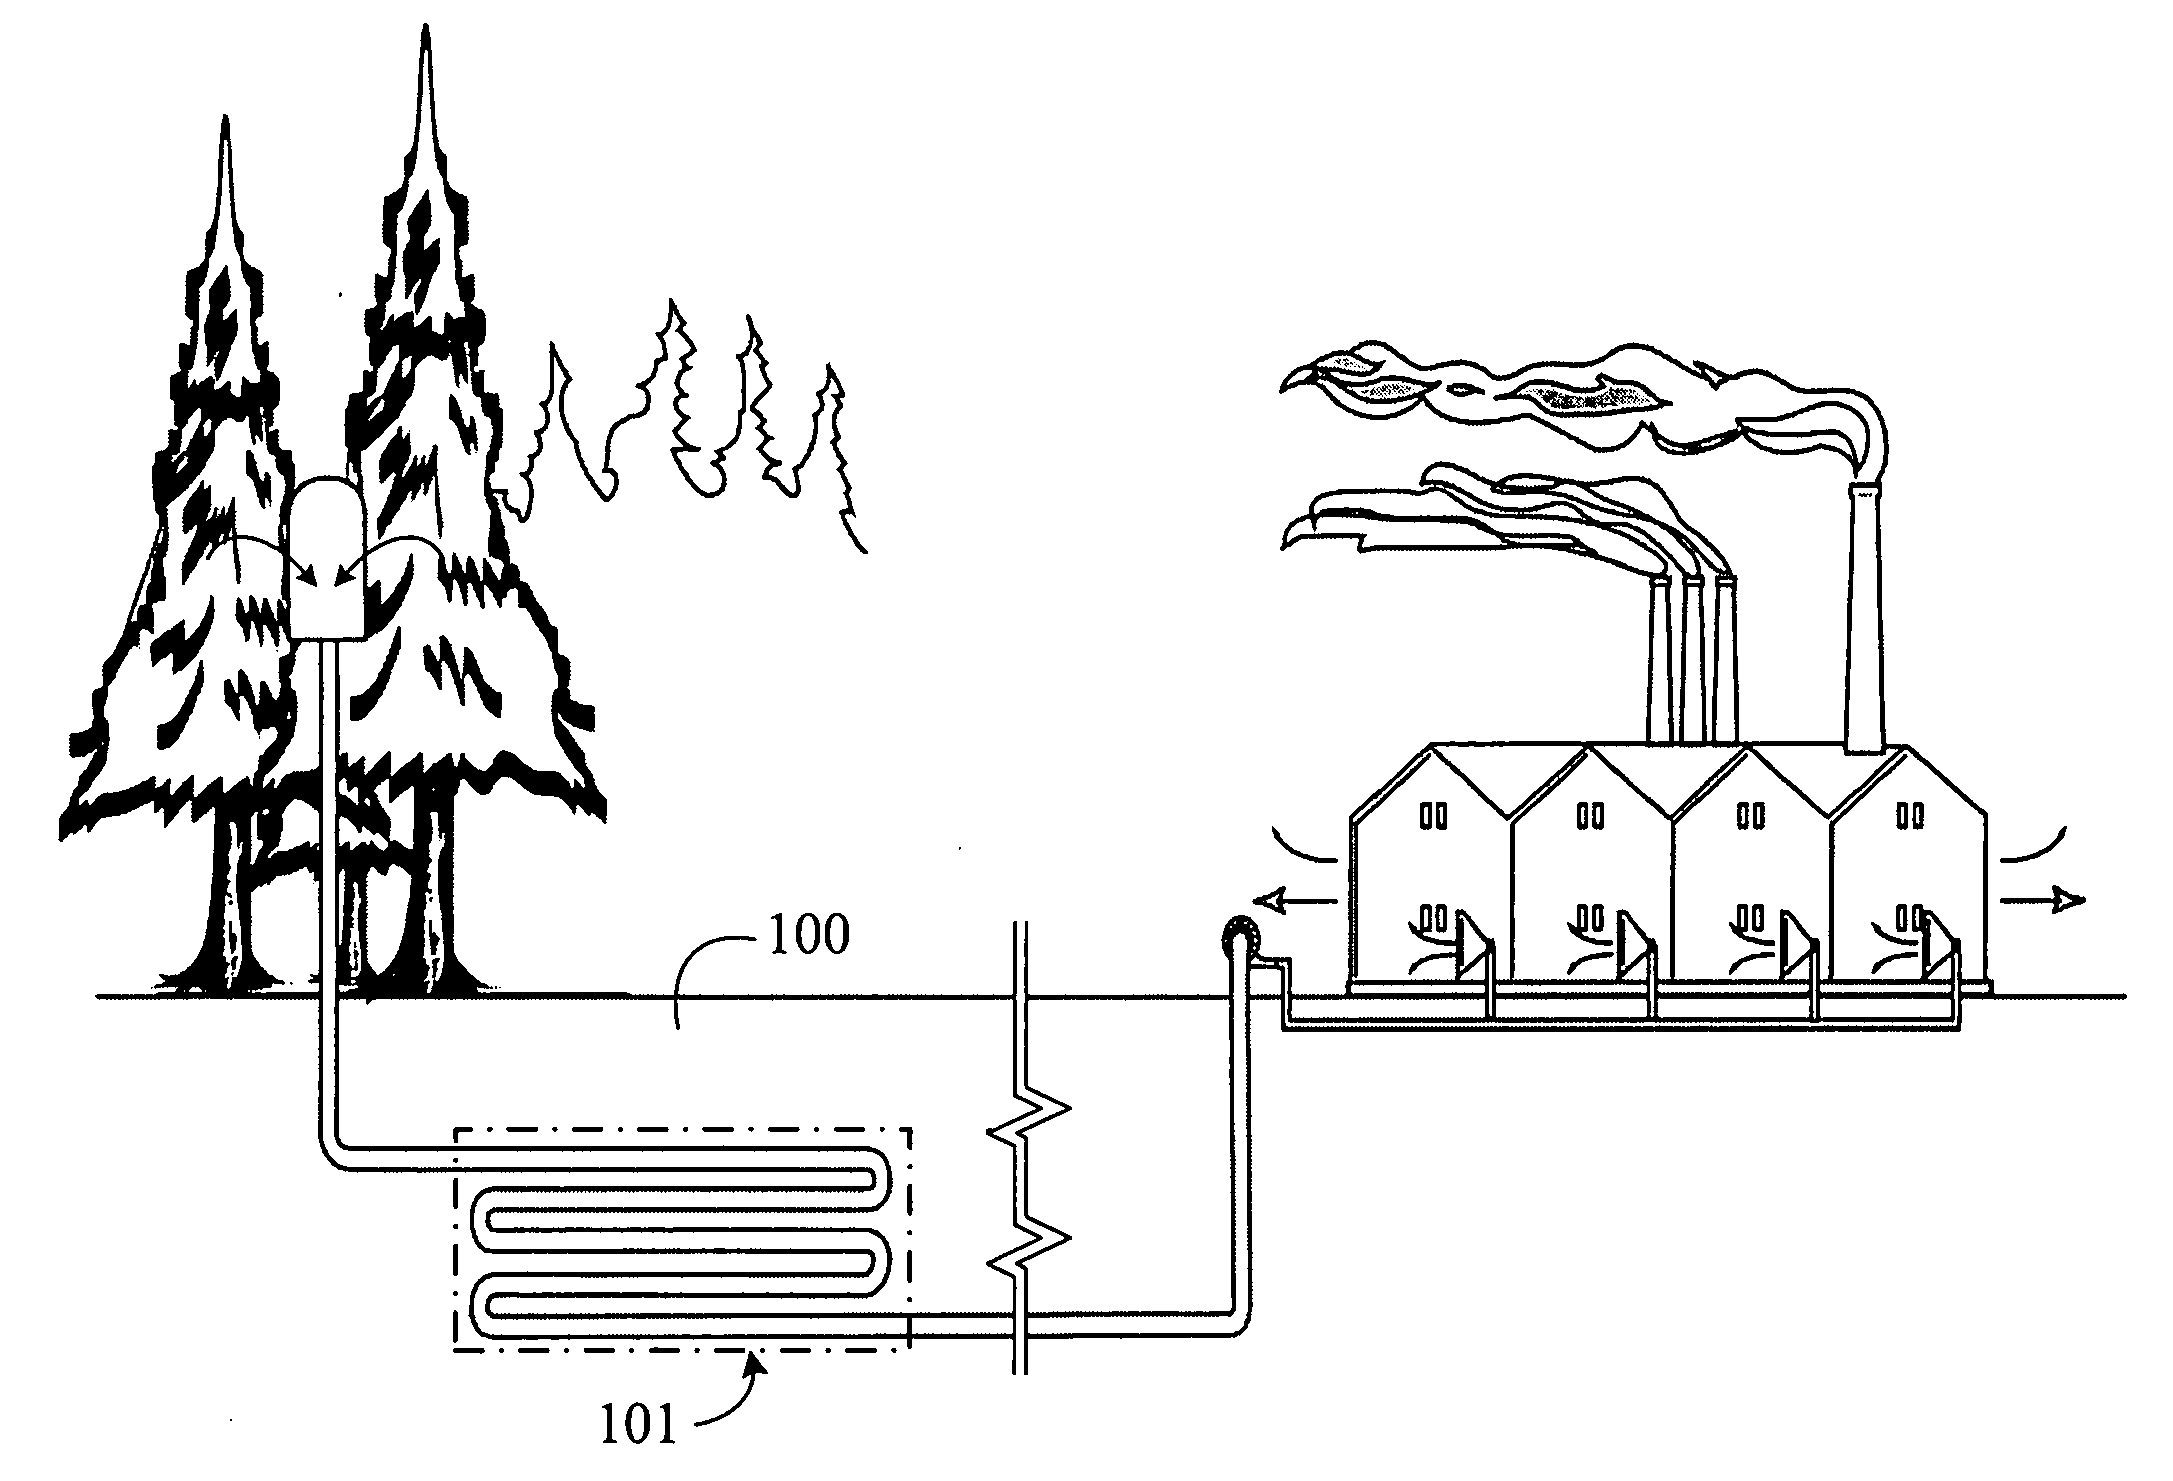 Temperature equalization air supply system of natural thermal energy with intermediate thermal storage